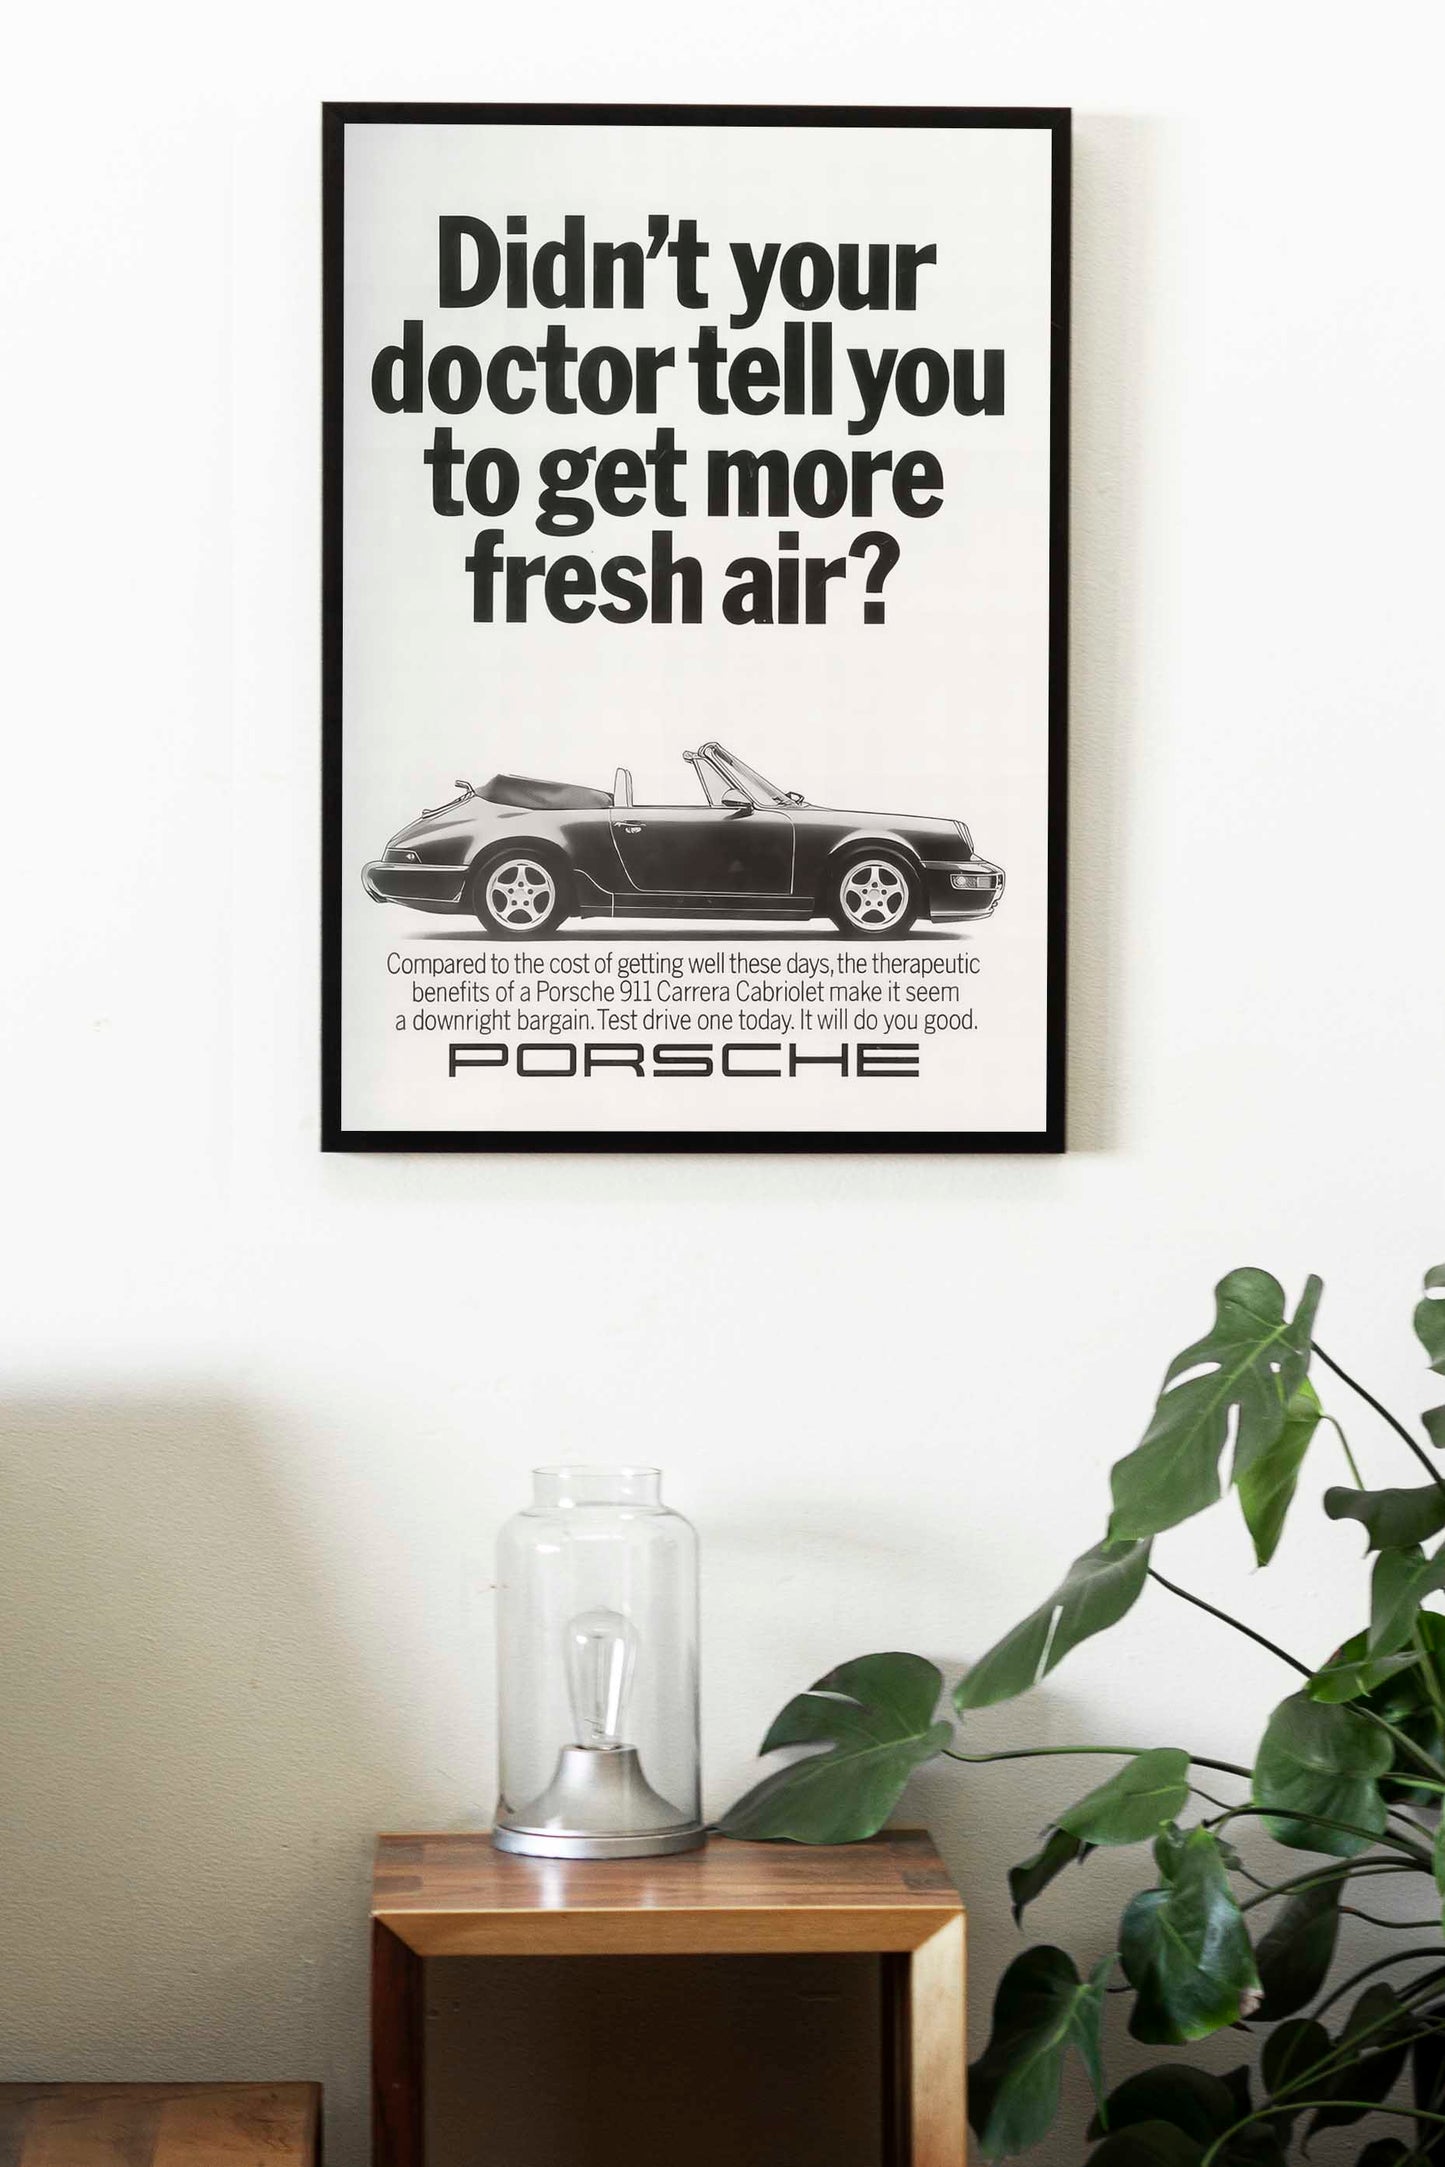 Porsche 911 "Didn't Your Doctor Tell You To Get More Fresh Air?" Poster